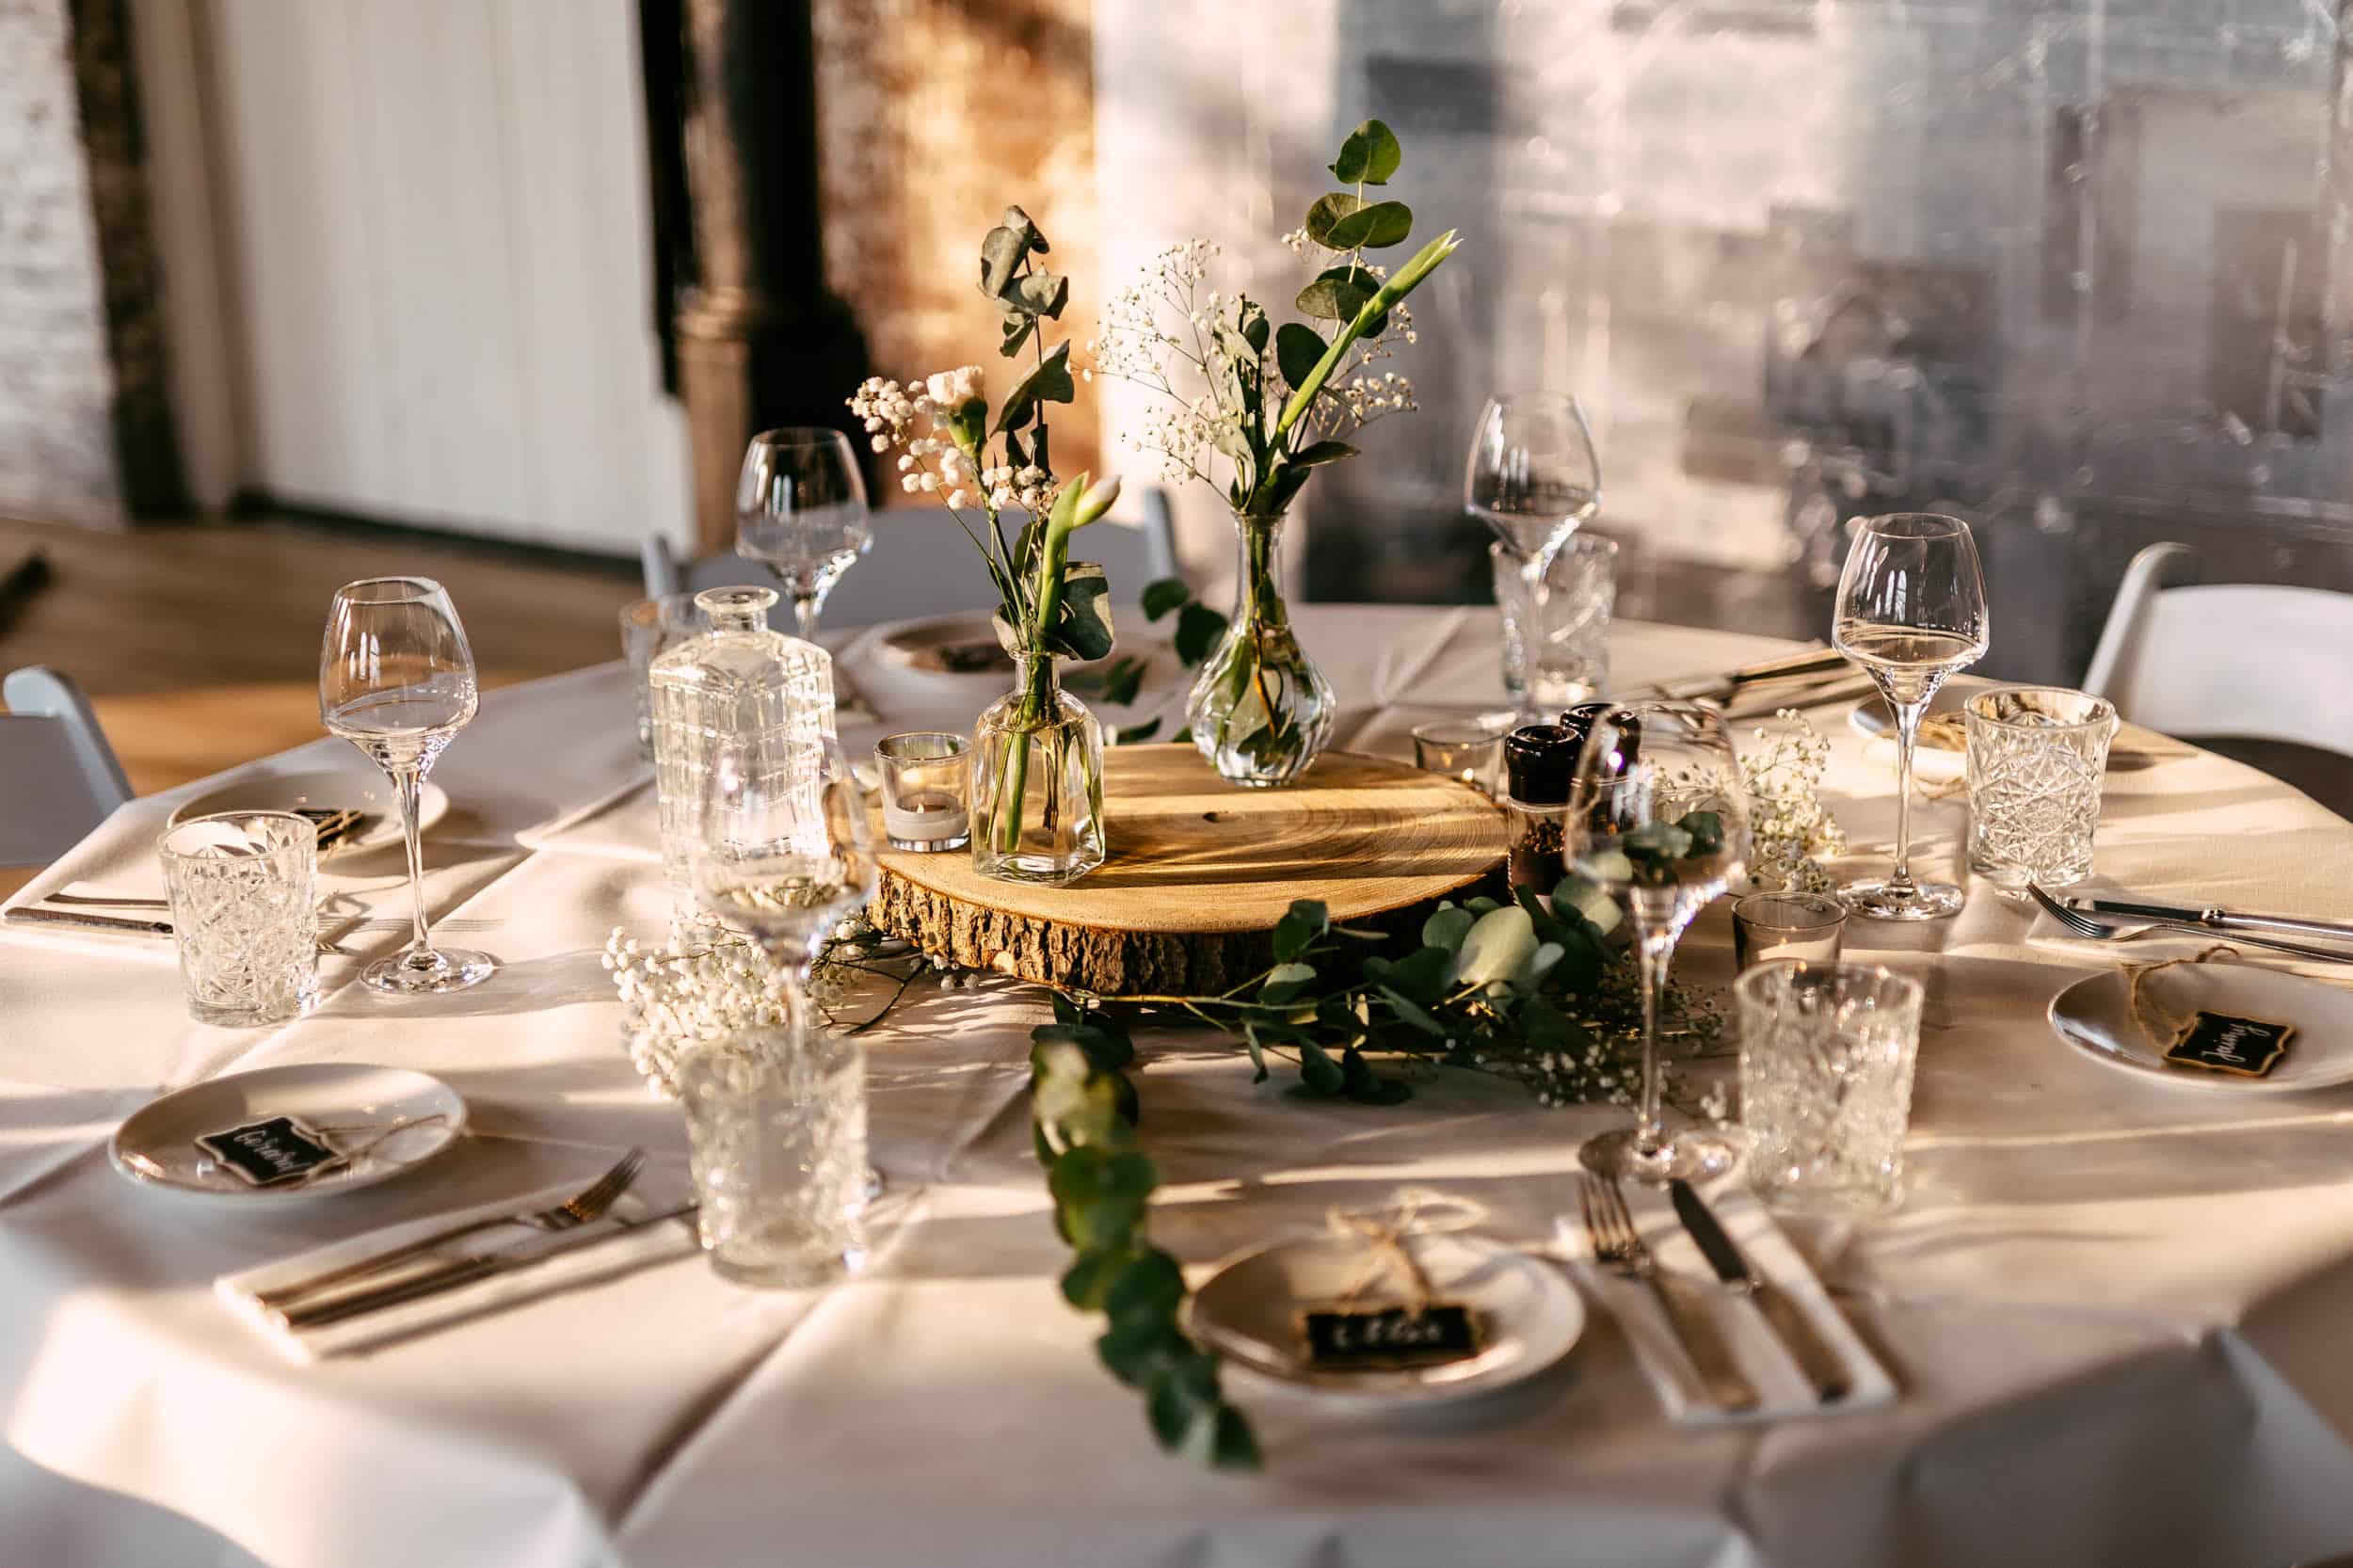 A table setting with white plates, glasses and greenery.